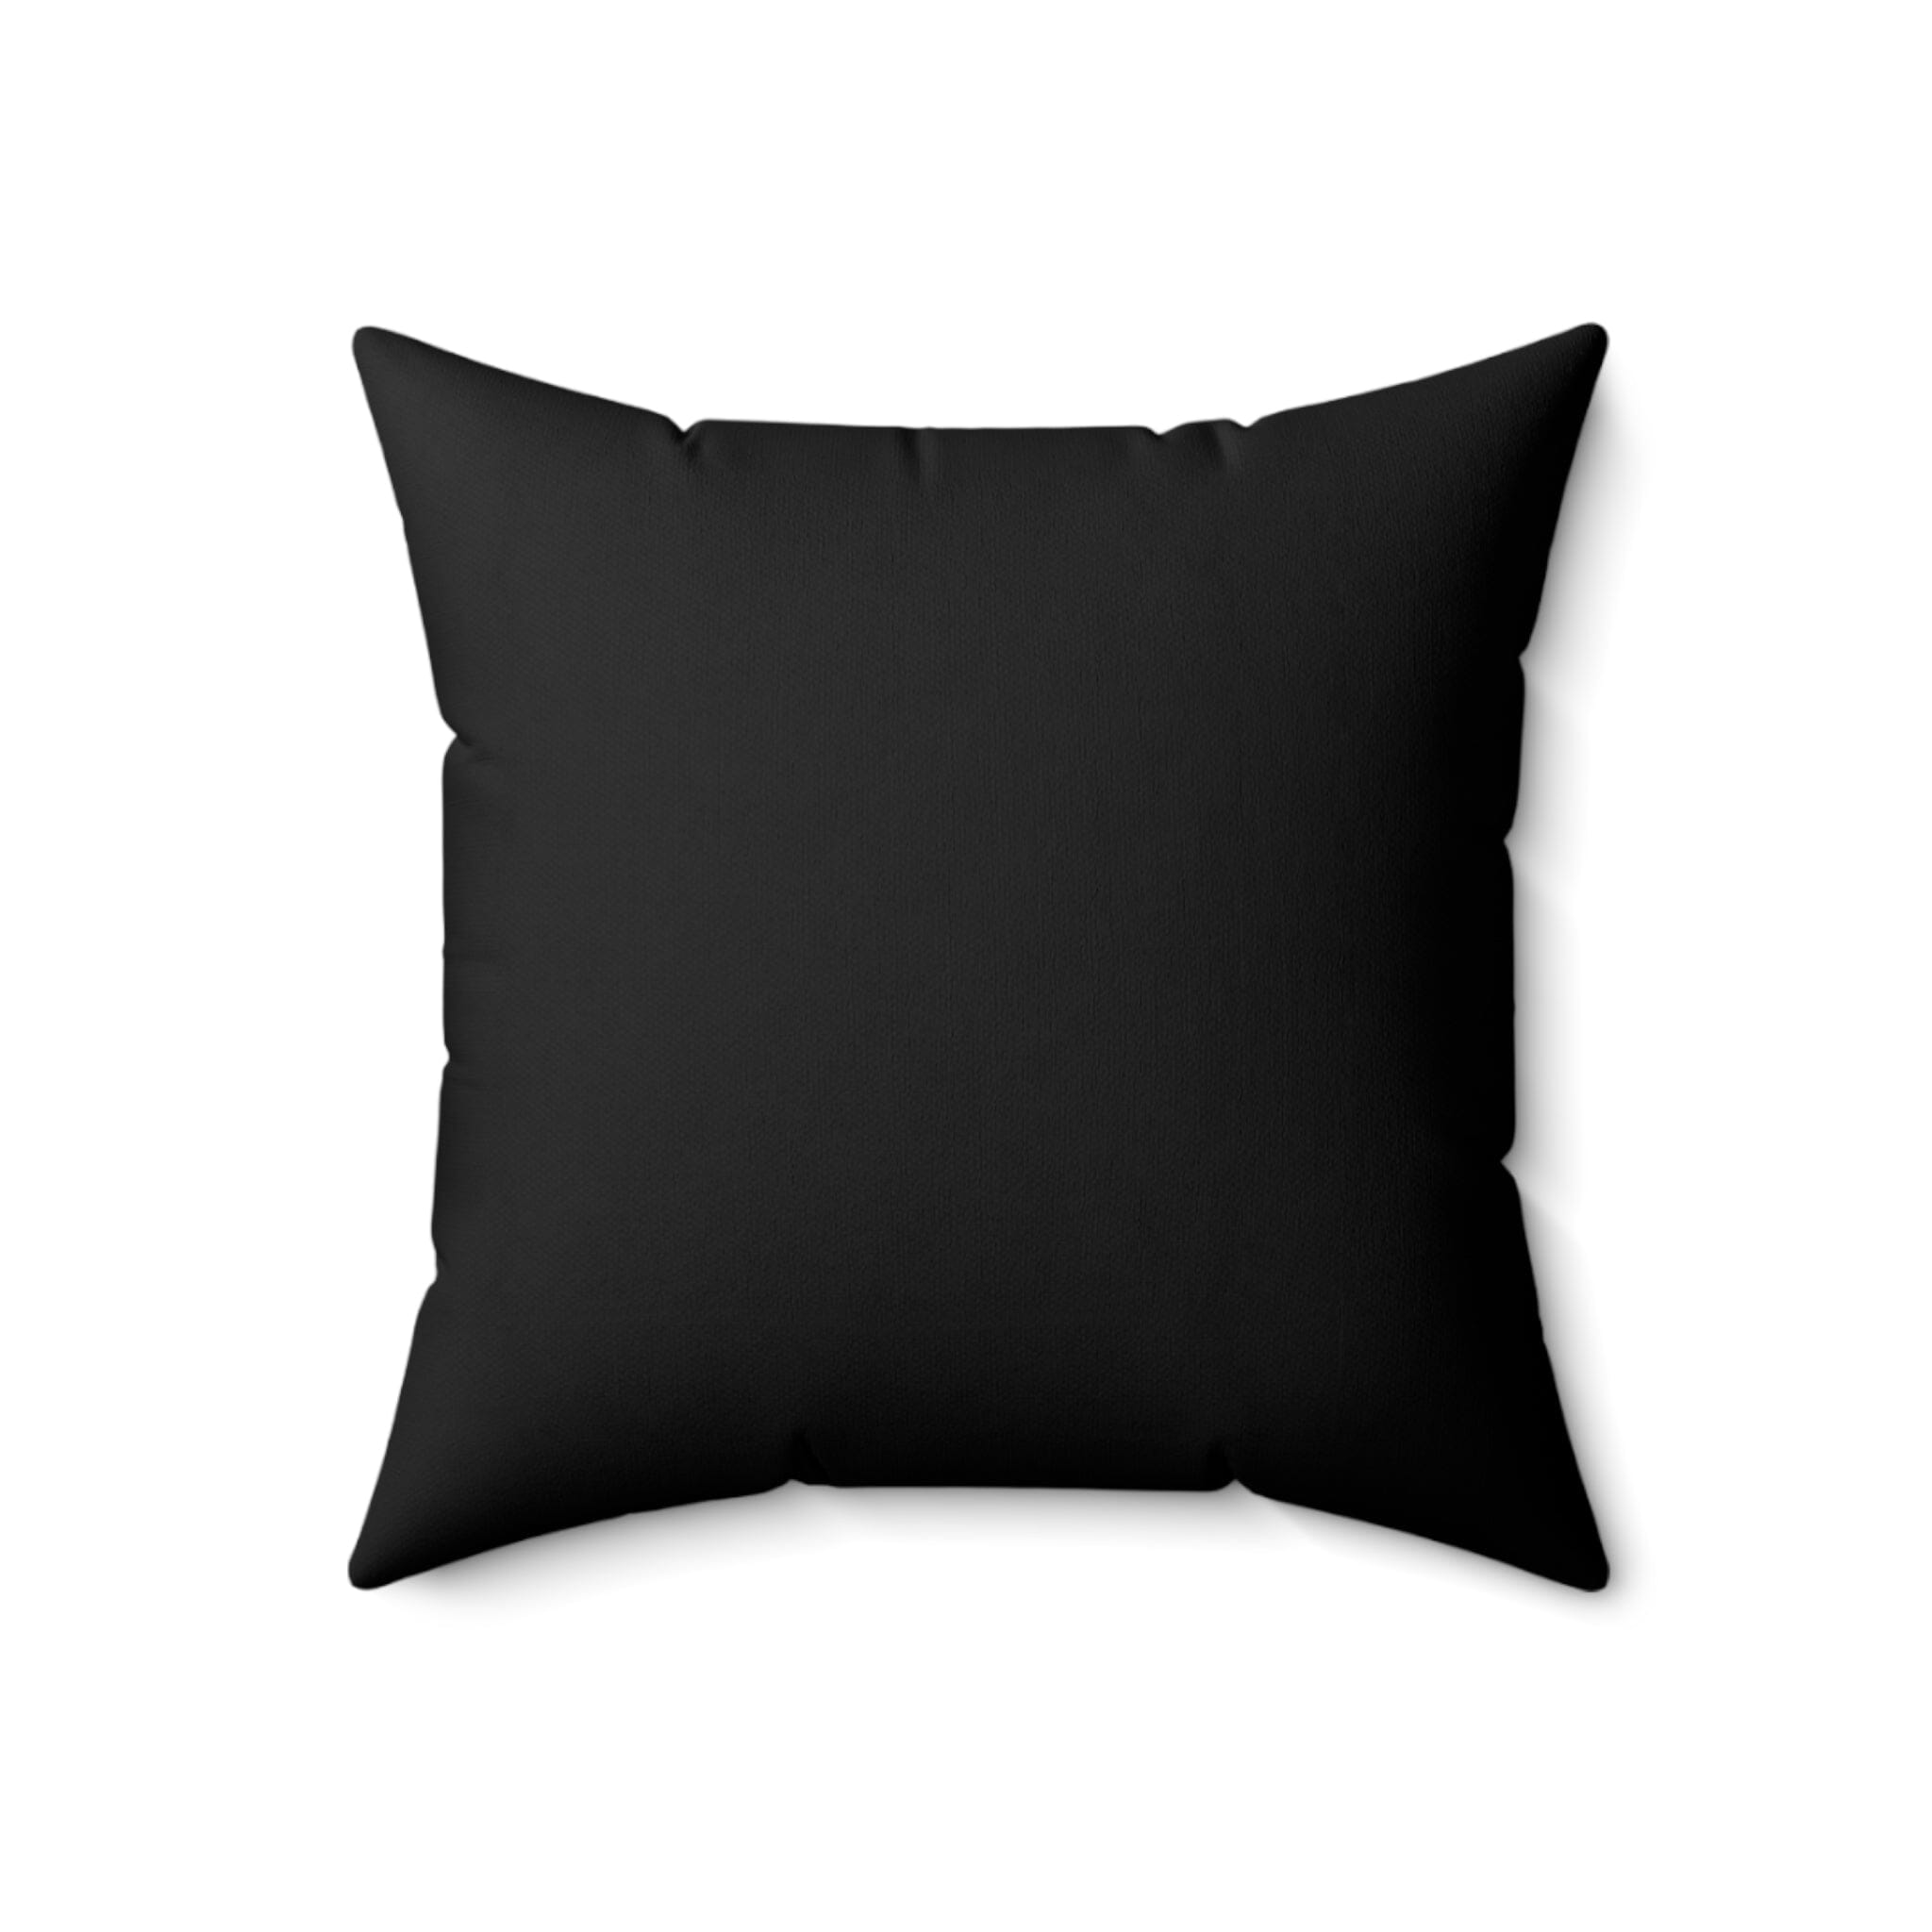 I'm Too Autistic for This Sh*t Pillow Home Decor The Autistic Innovator 